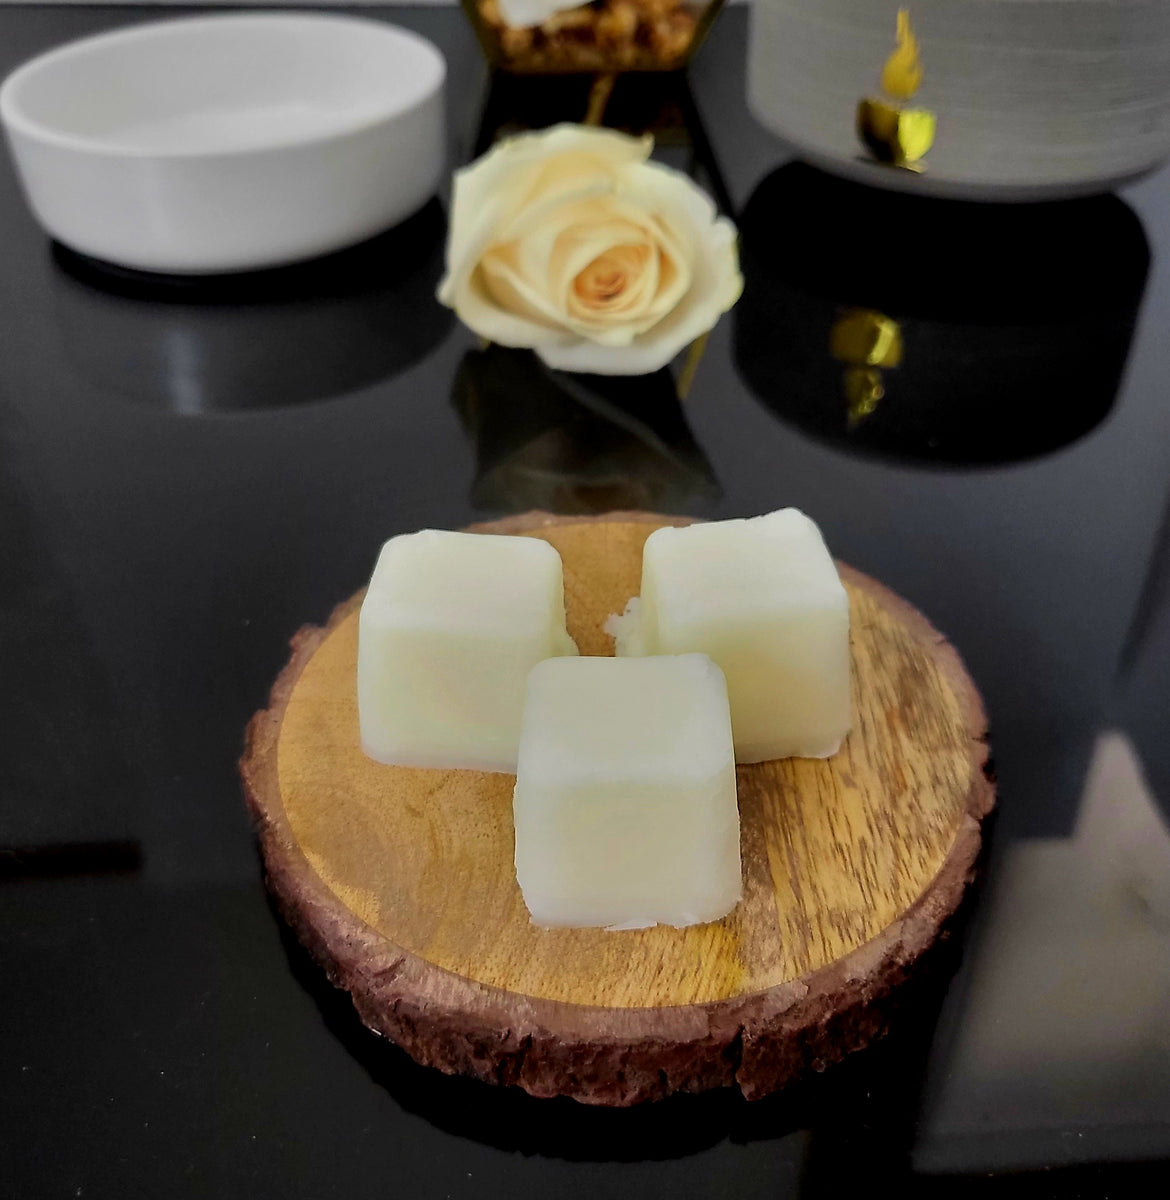 Luxury Highly Scented Wax Melts – Jolis Reine Candle Co